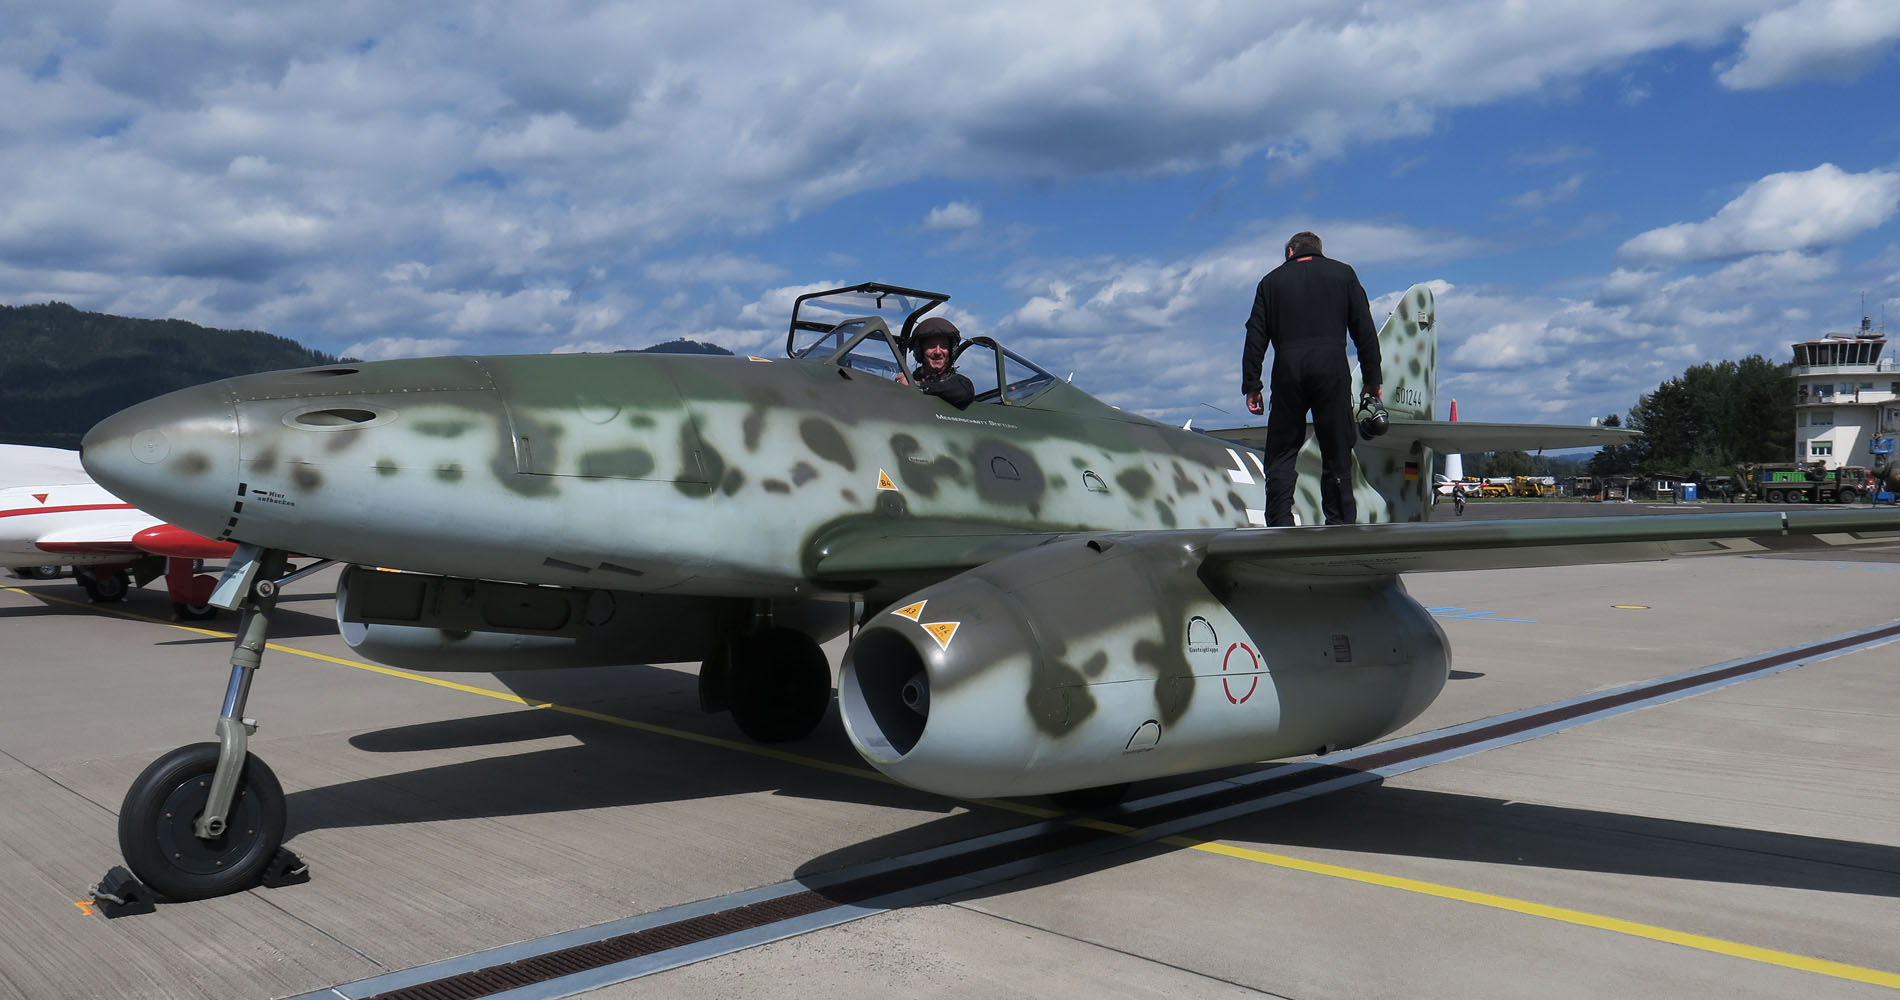  AIRPOWER22 - Me 262 